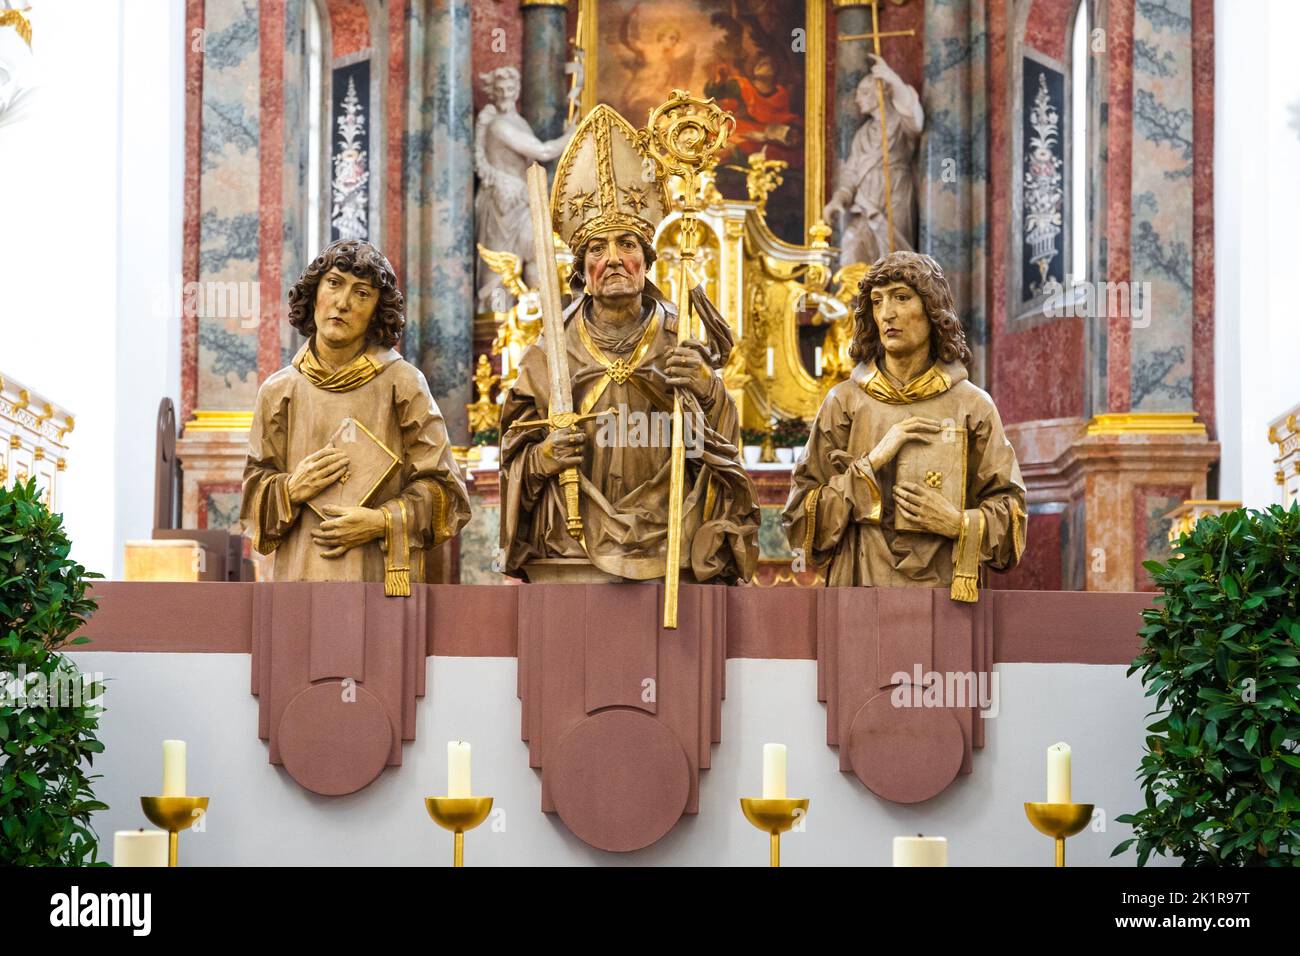 Great close-up view of the three busts of the Frankish apostles Totnan, Kilian and Kolonat installed at the transition from the nave to the transept... Stock Photo